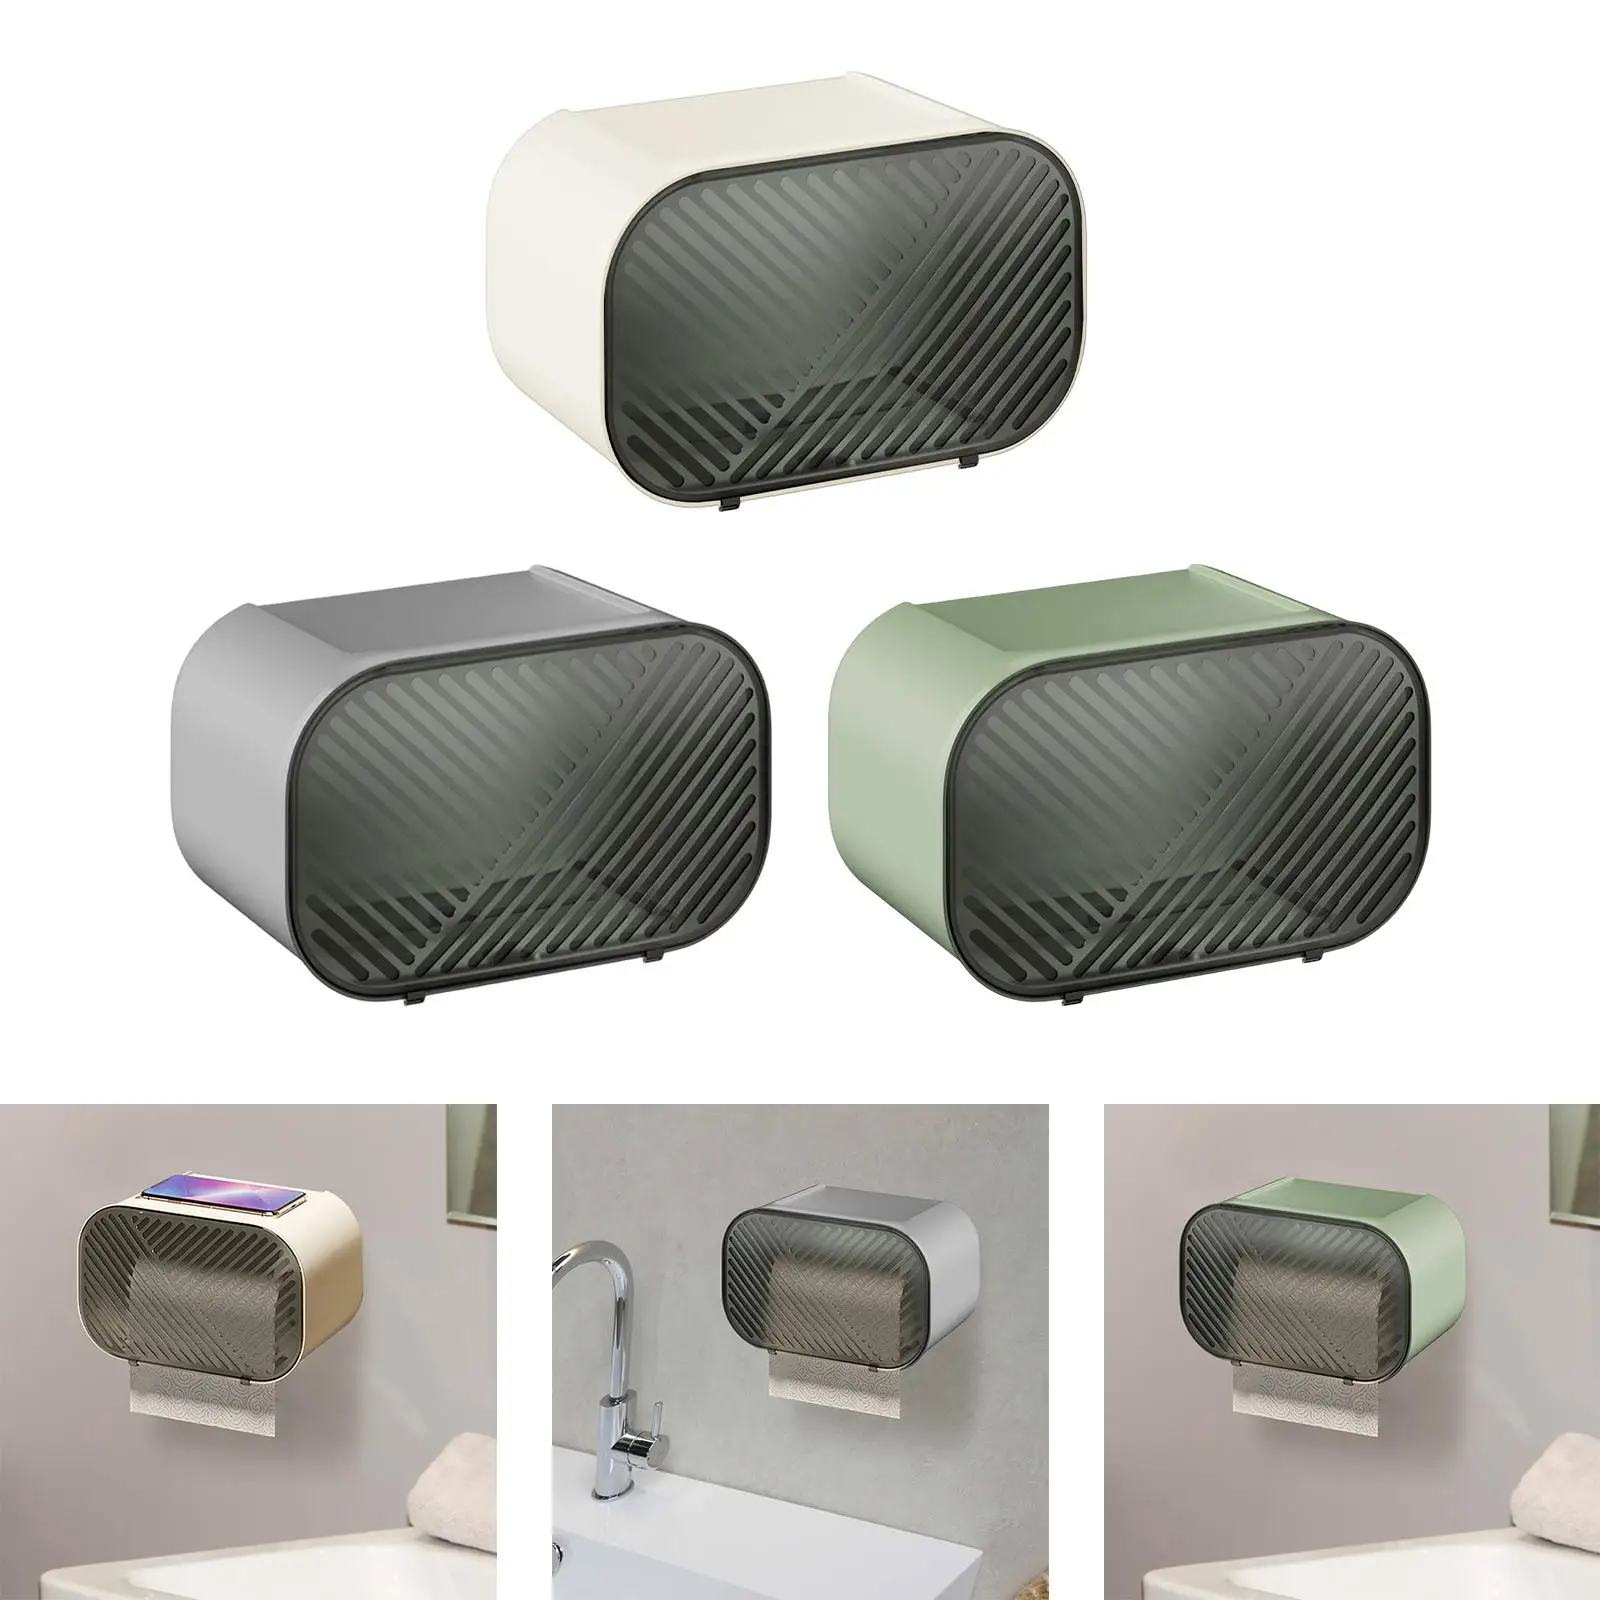 Paper Towel Holder with Shelf Self Adhesive Stand Wall Mount Organizer Tissue Box for Bathroom Countertop Home Kitchen Bedroom